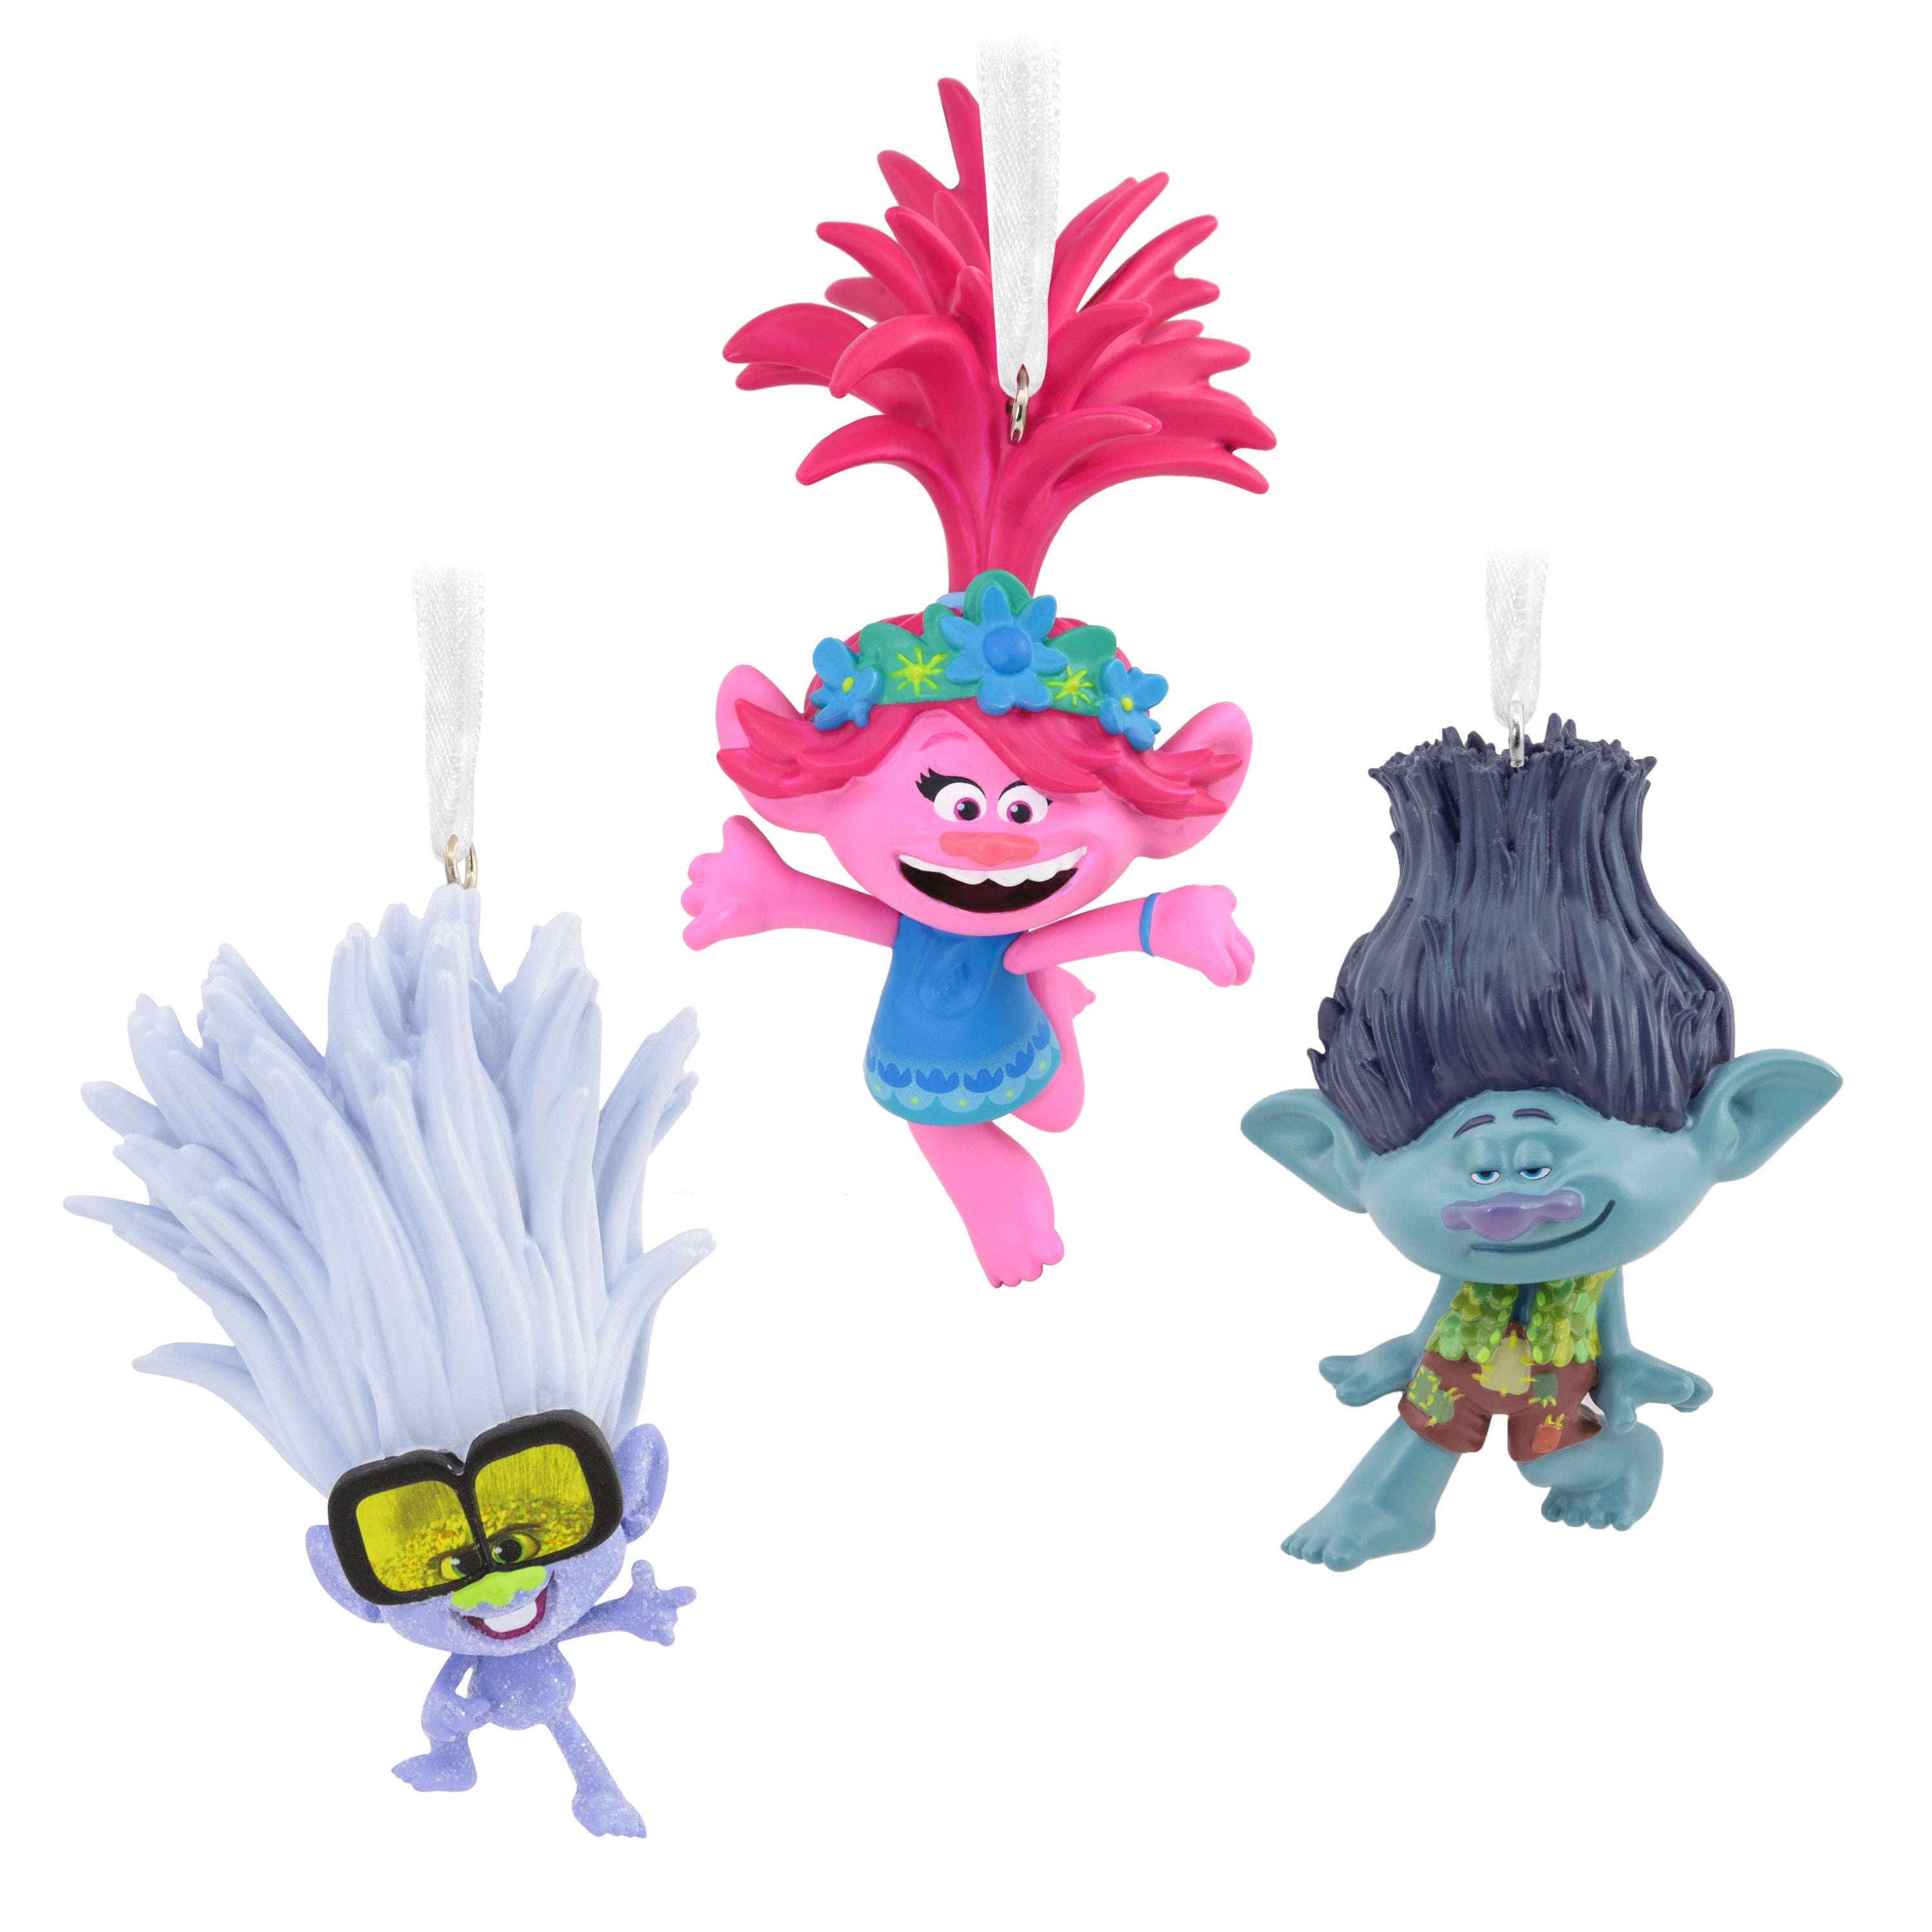 Details about   Christmas Tree Decorations TROLLS WORLD TOUR Set of 10 Hanging Figures 